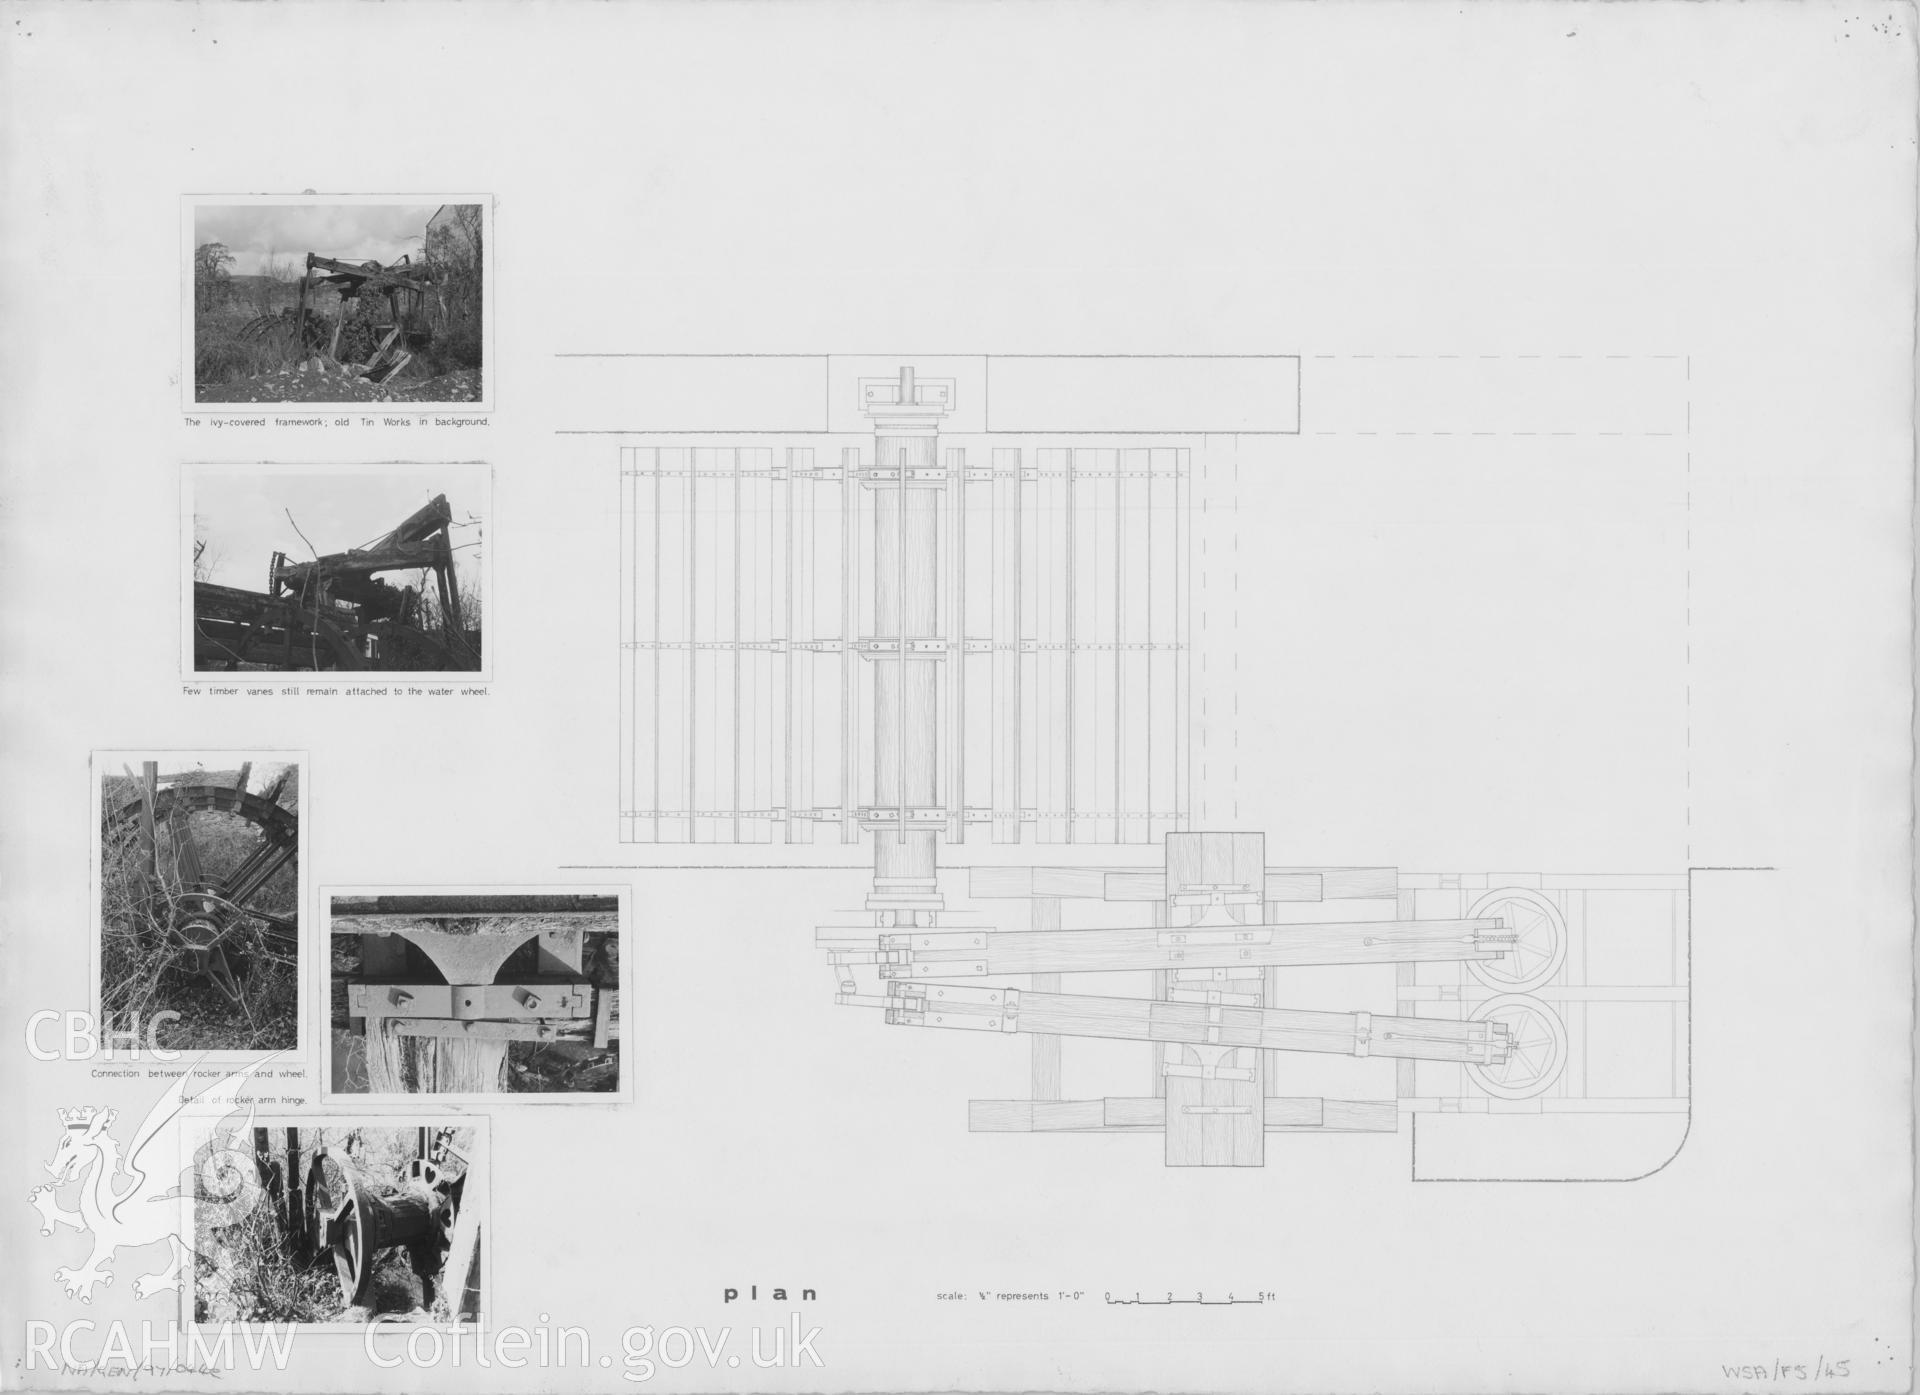 Measured drawing showing plan and five B&W photos of Melingriffith Water Pump, produced by R.V. Bayliss and I. Payne, undated.